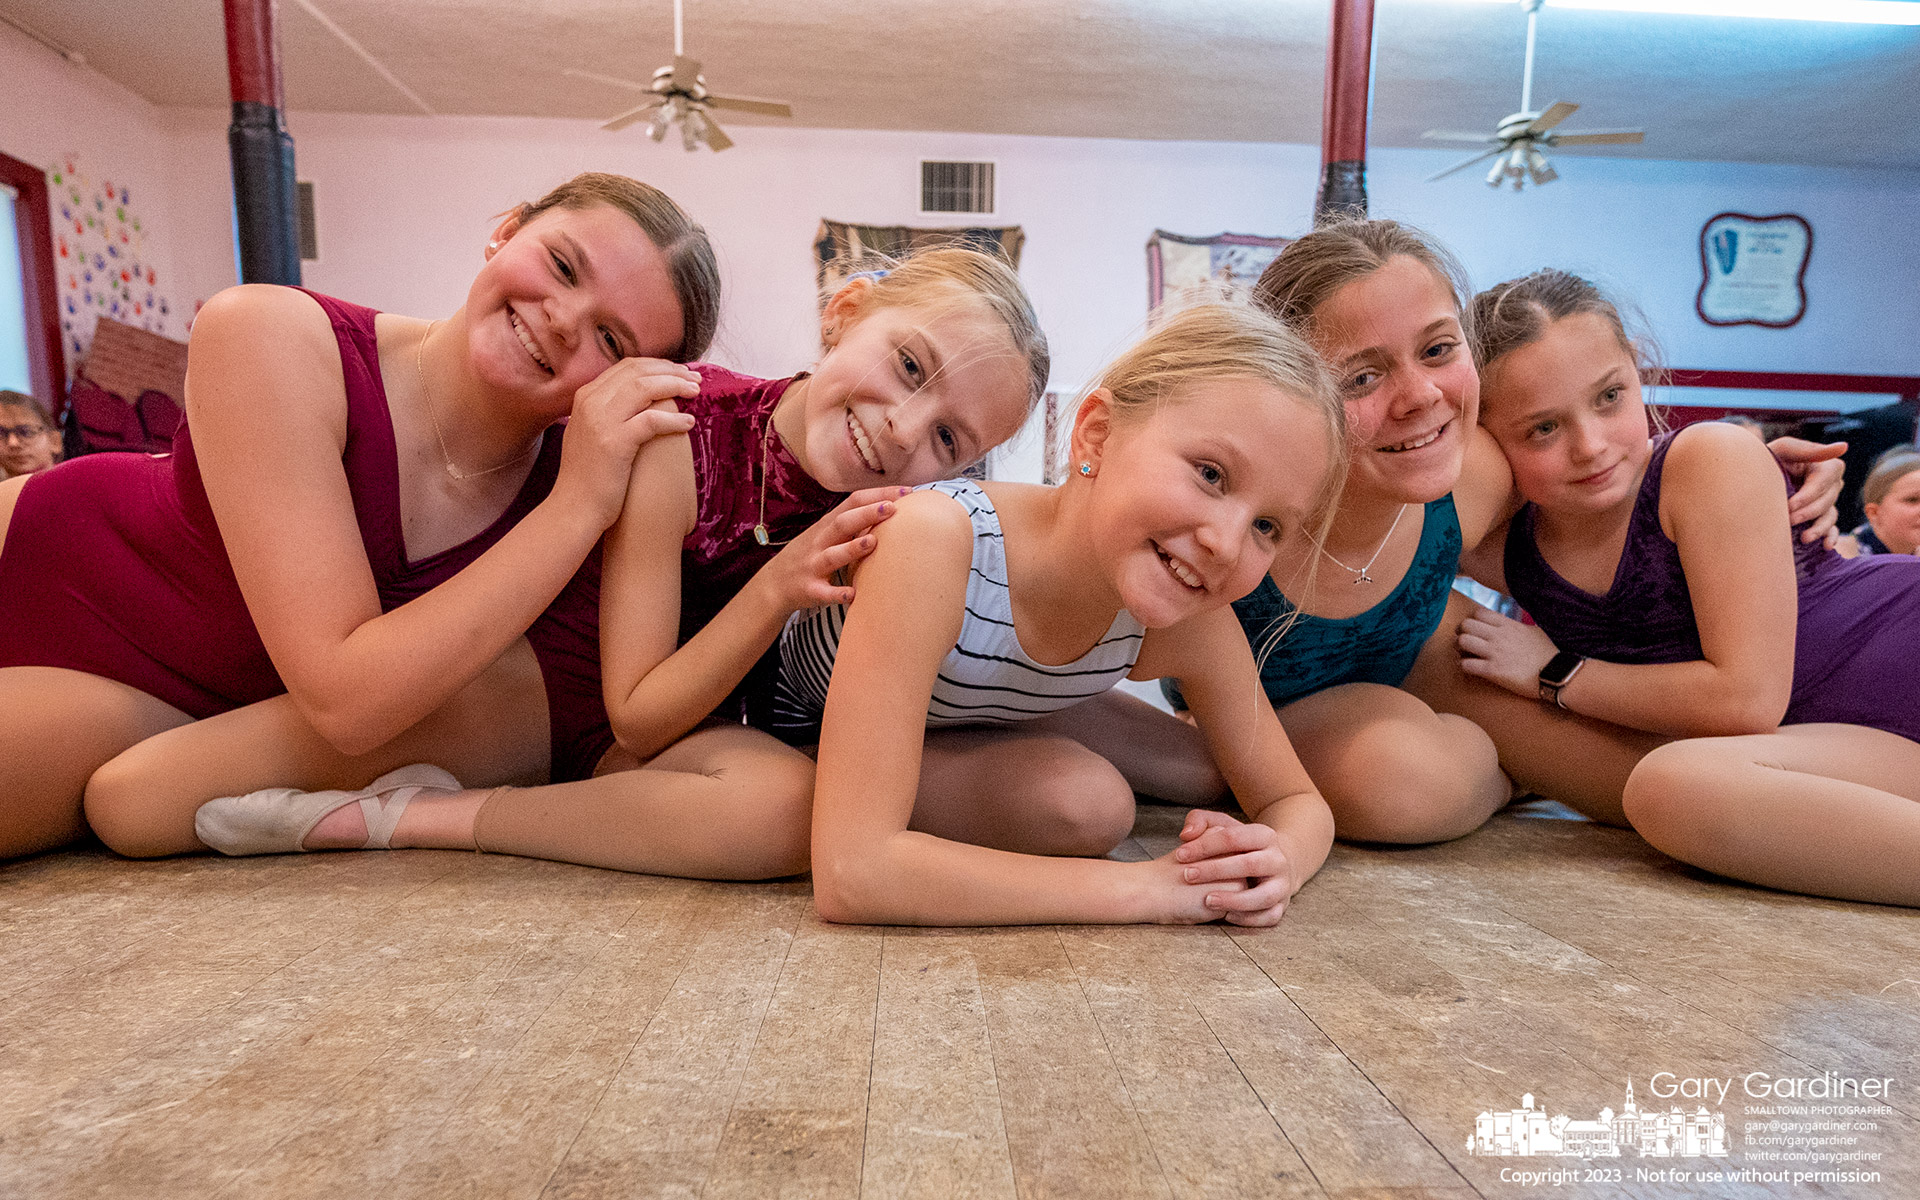 A quintet of dancers smiles at the completion of their final practice routine for the afternoon at Generations in Uptown Westerville. My Final Photo for January 21, 2023.